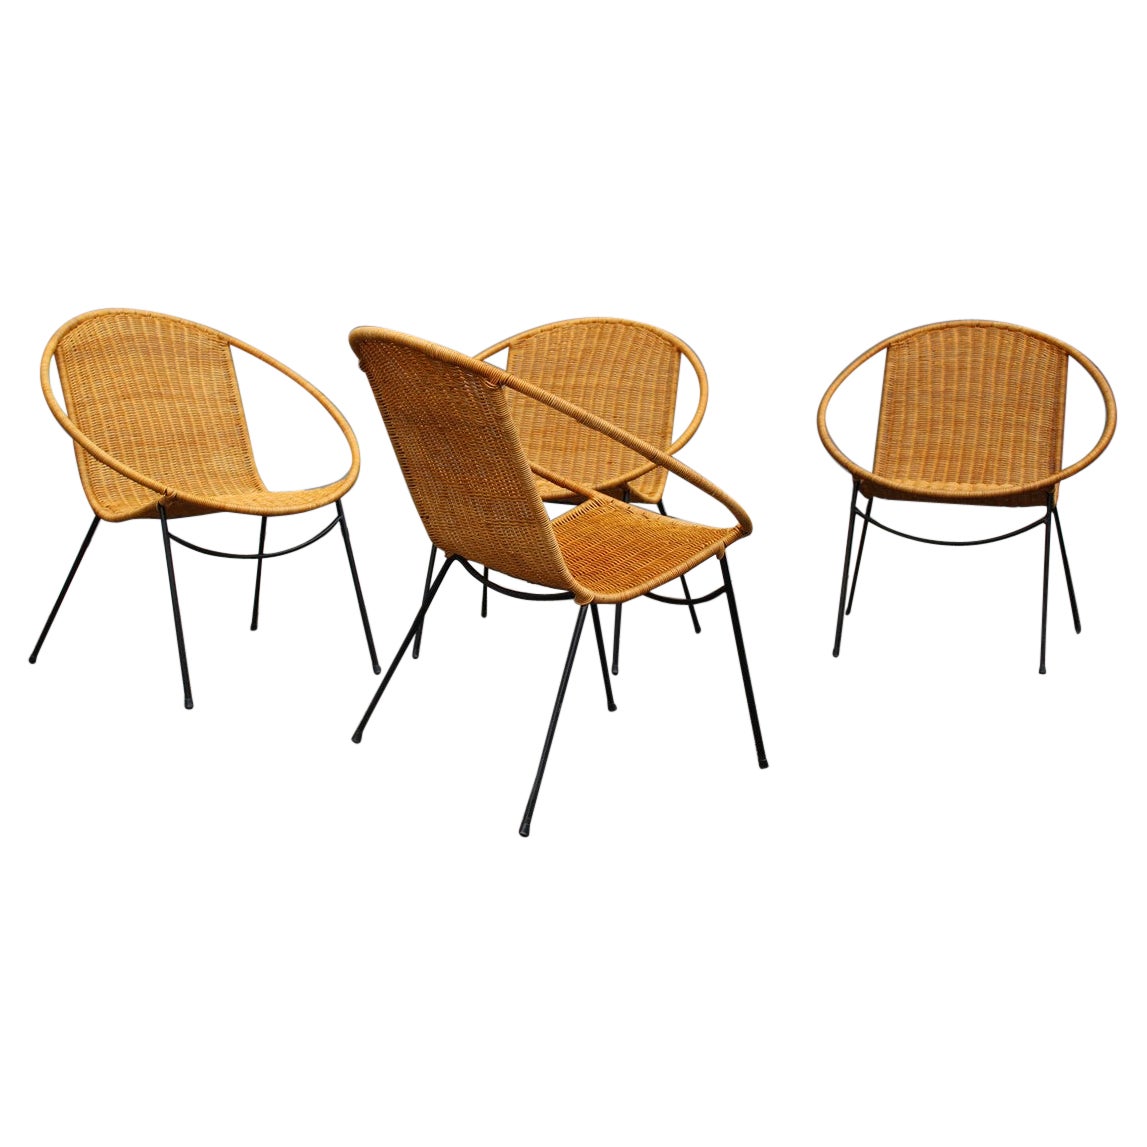 Set Campo & Graffi Garden Armchairs in Metal and Wicker Italy Design, 1950s For Sale